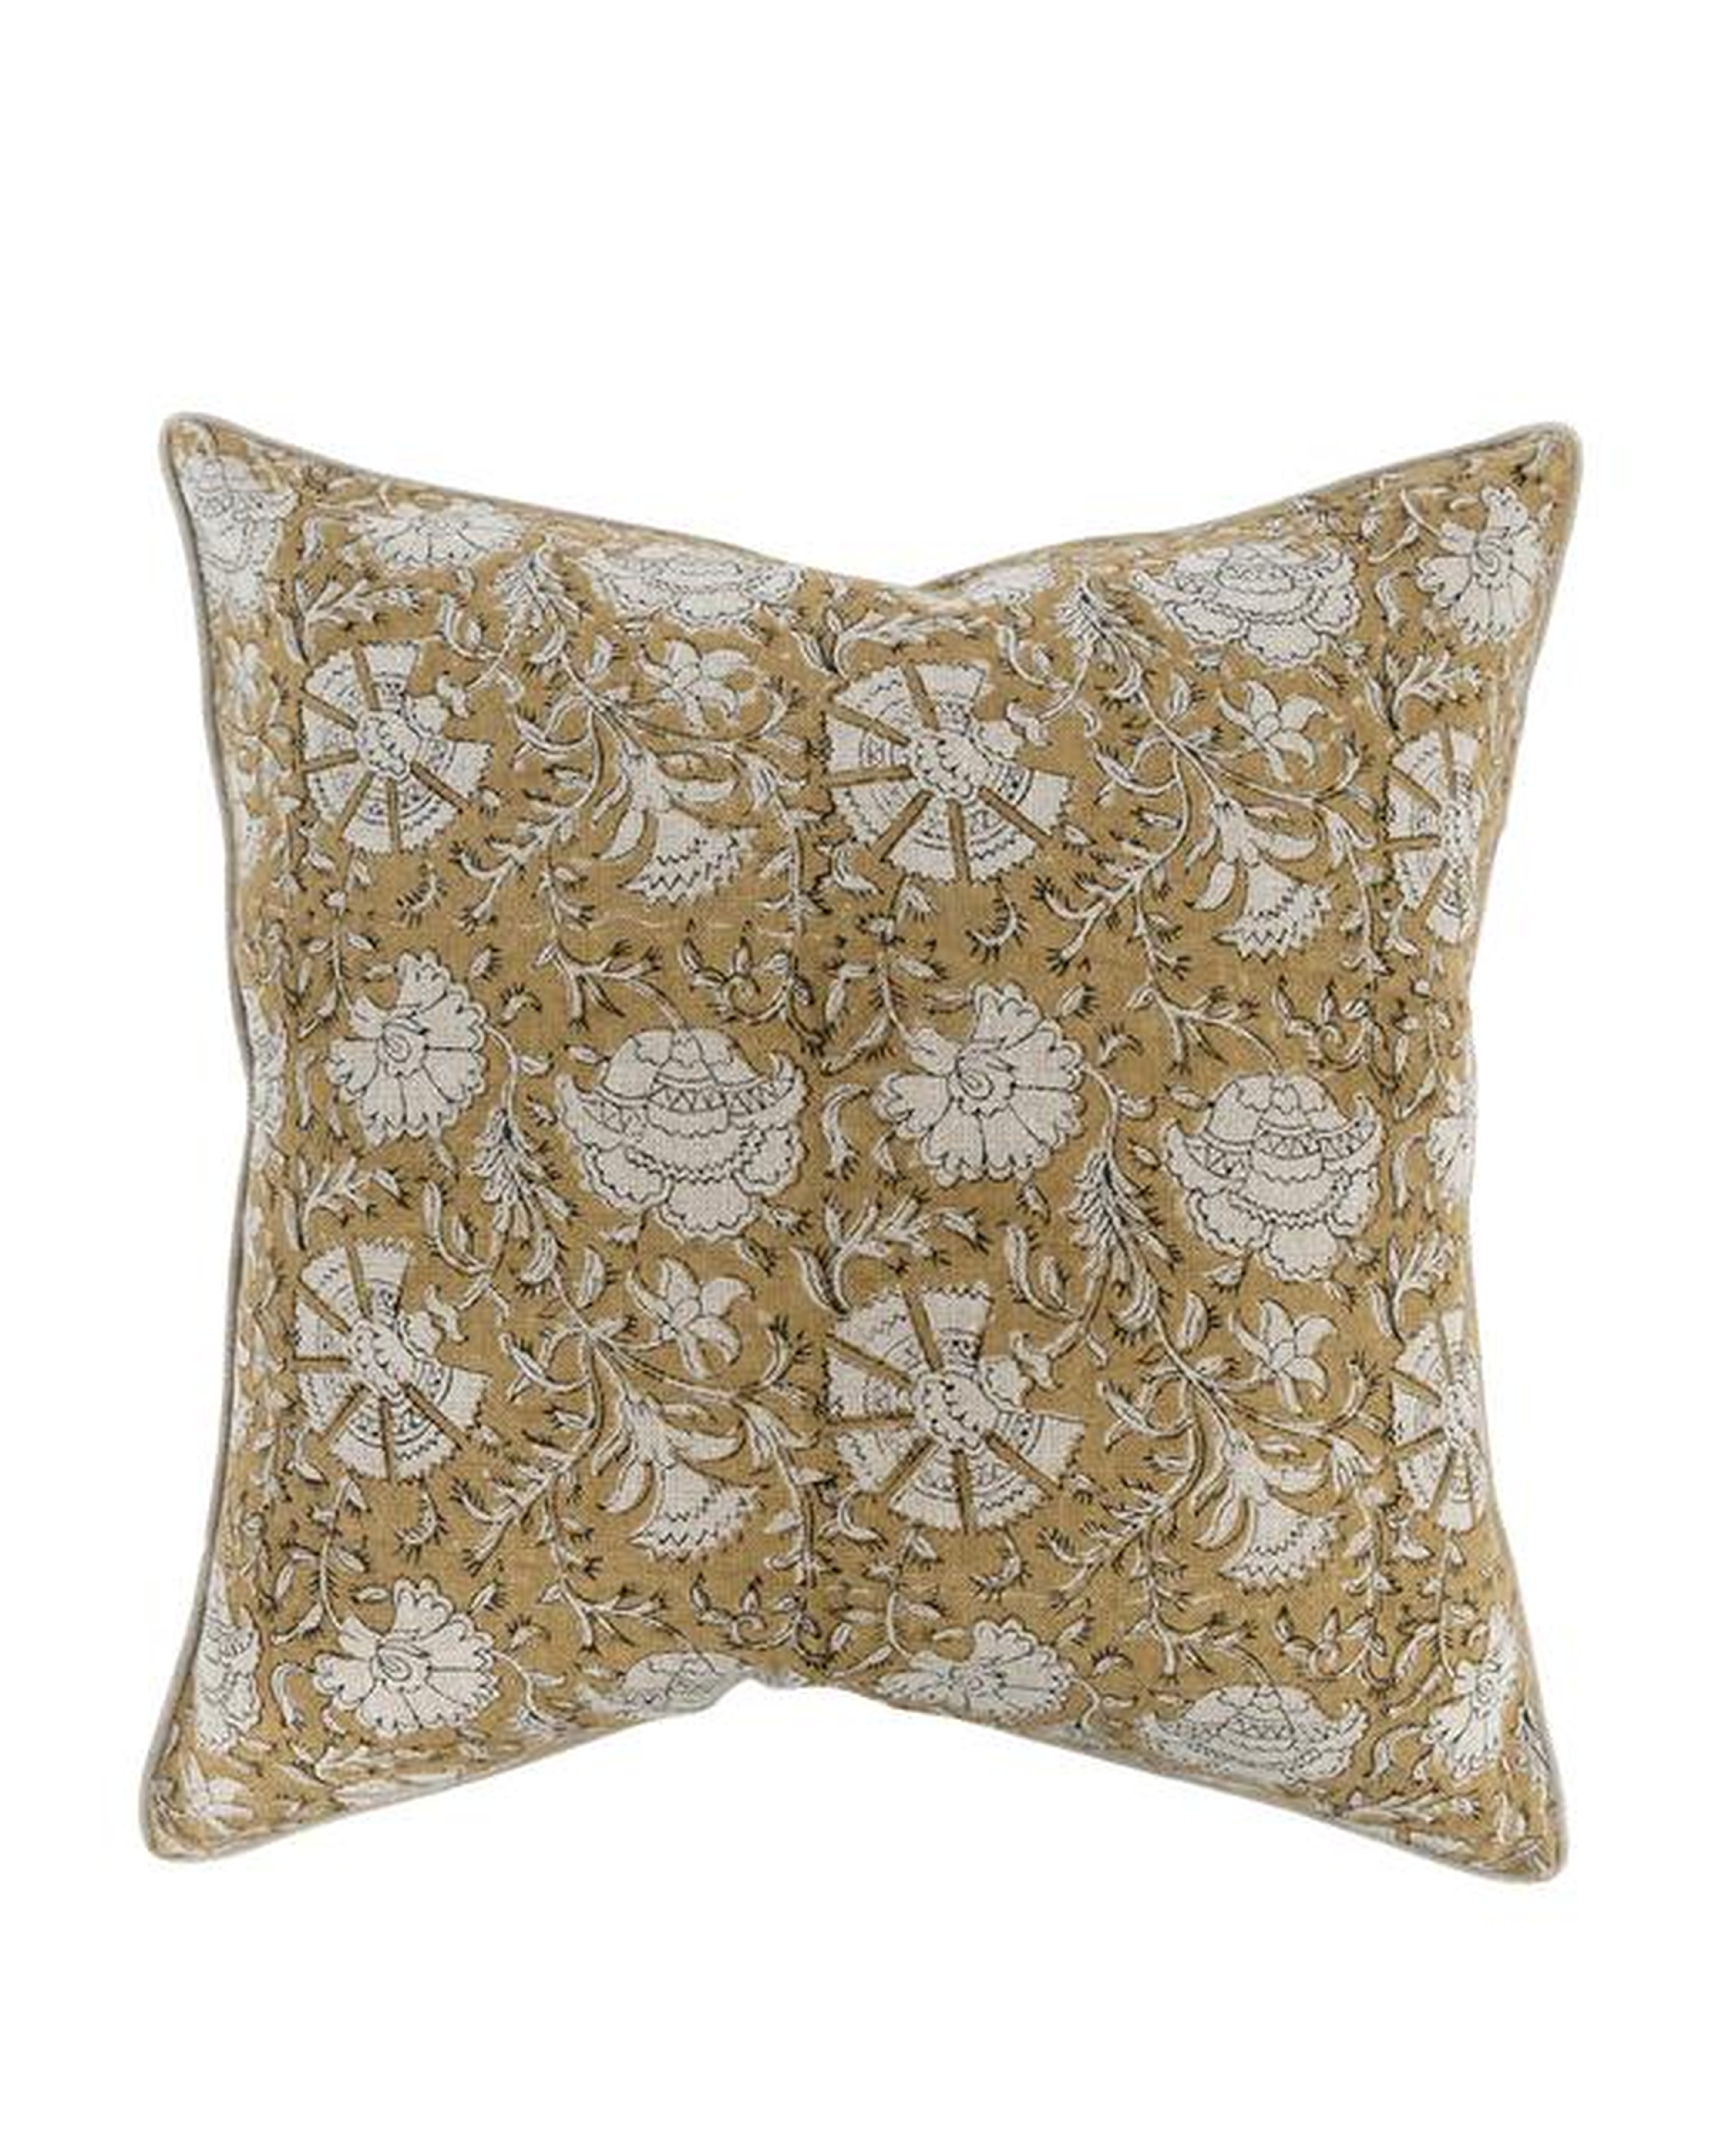 Bern Pillow Cover - McGee & Co.